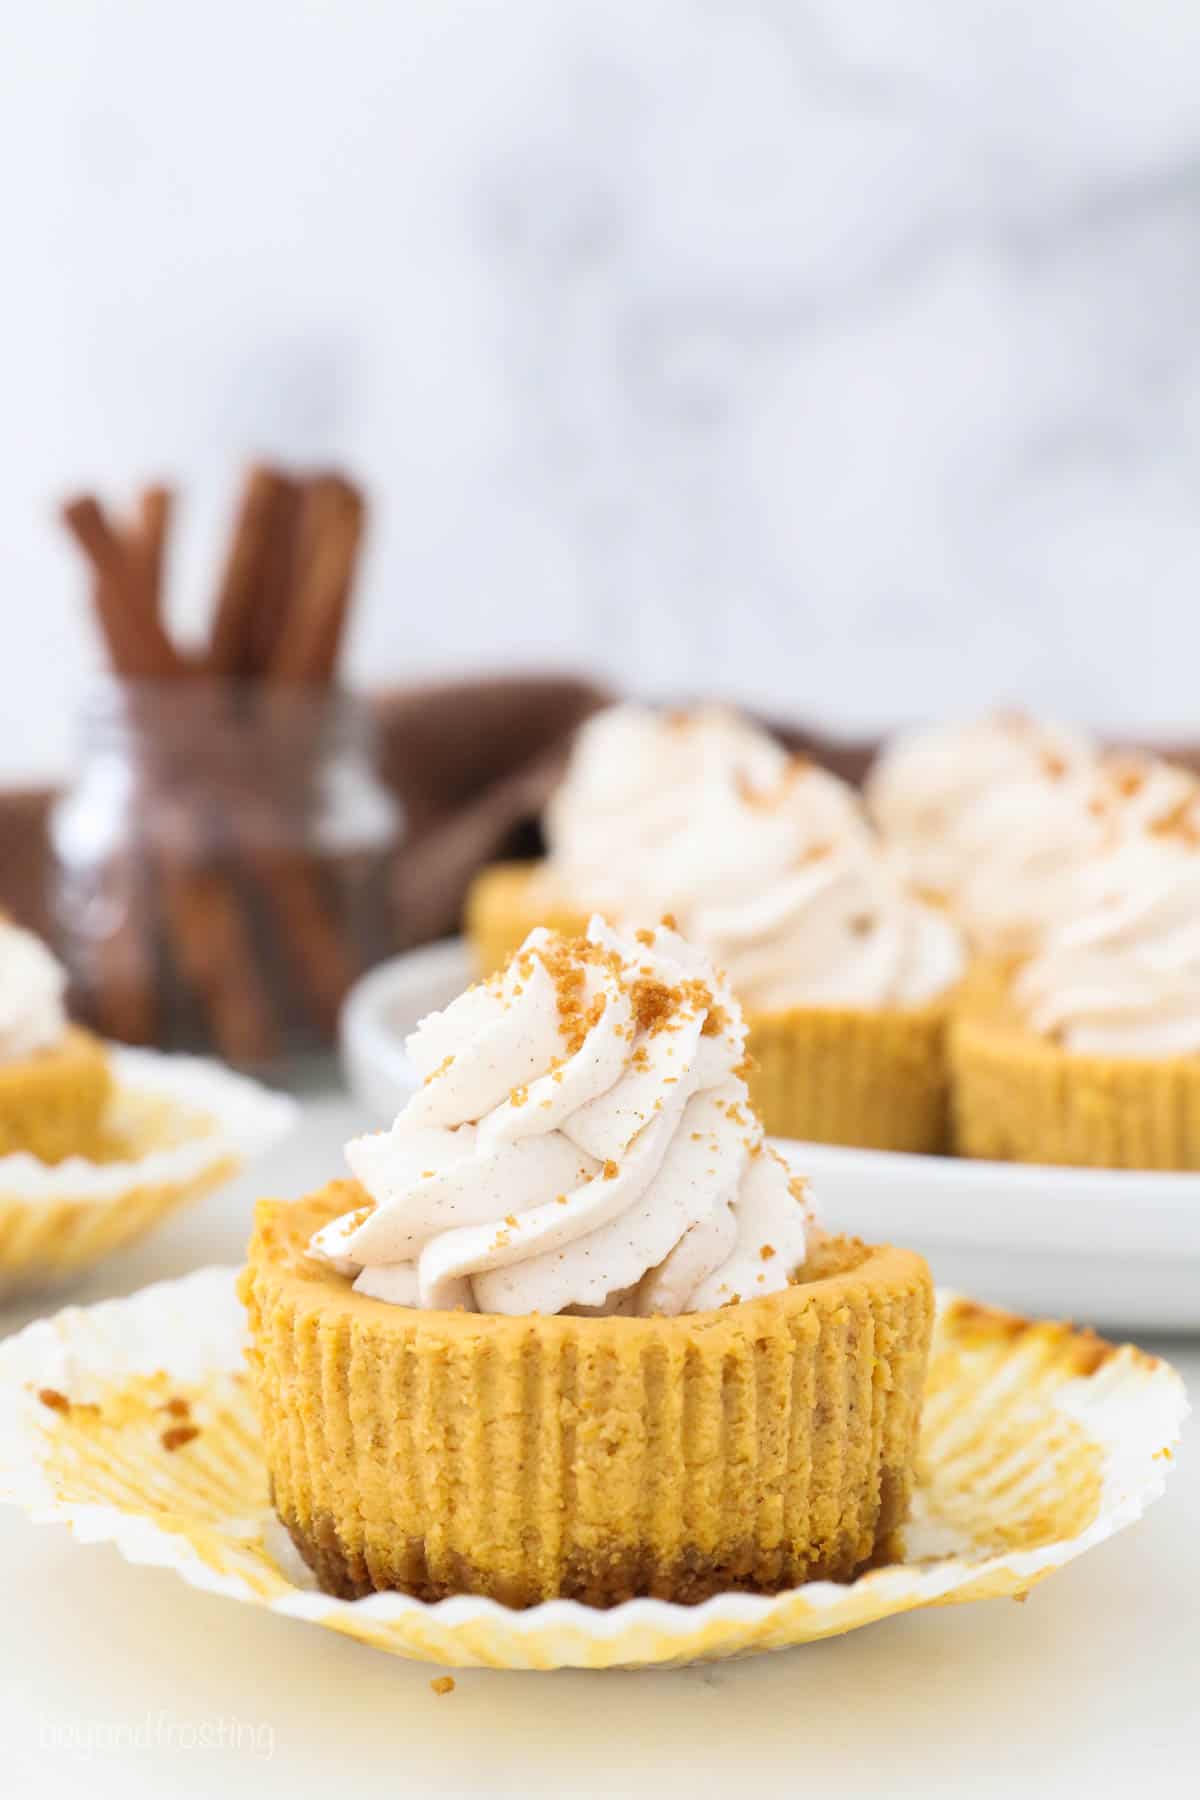 Unwrapped mini pumpkin cheesecake with whipped cream and cinnamon sticks in the background